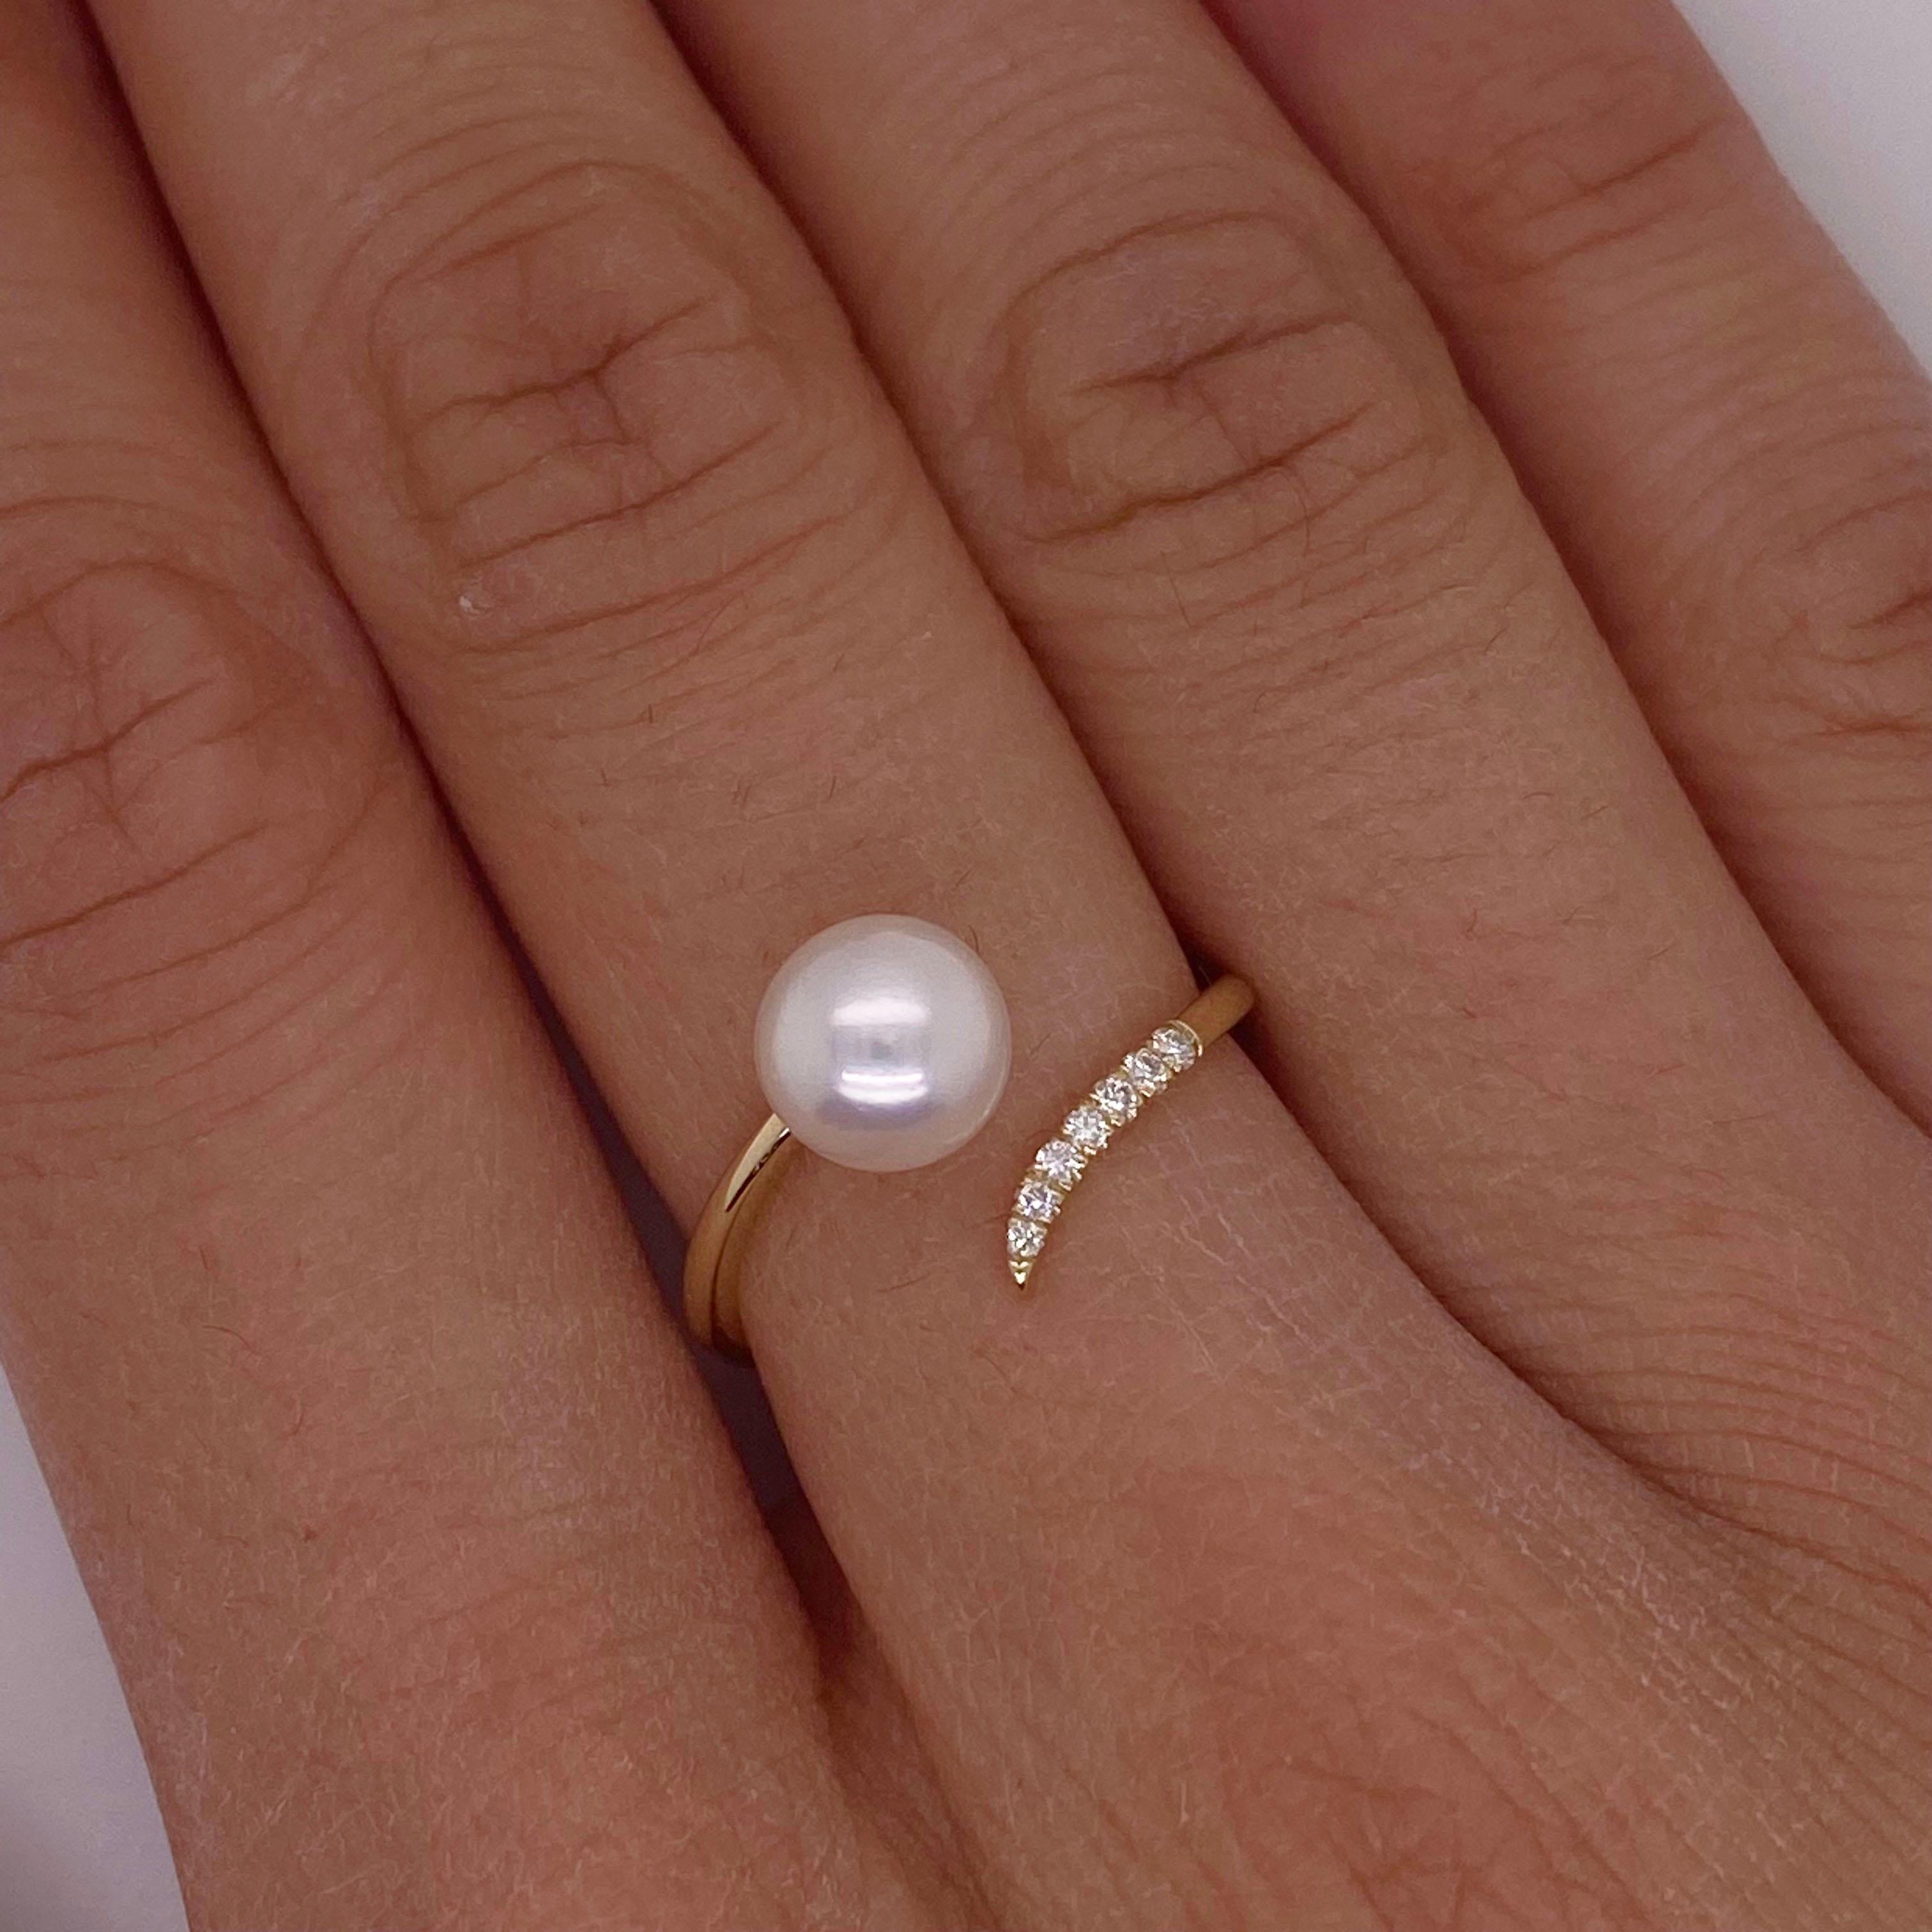 Pearl Diamond Ring w Bypass Assymetrical Design Open Wrap Ring, 14K Yellow Gold 4